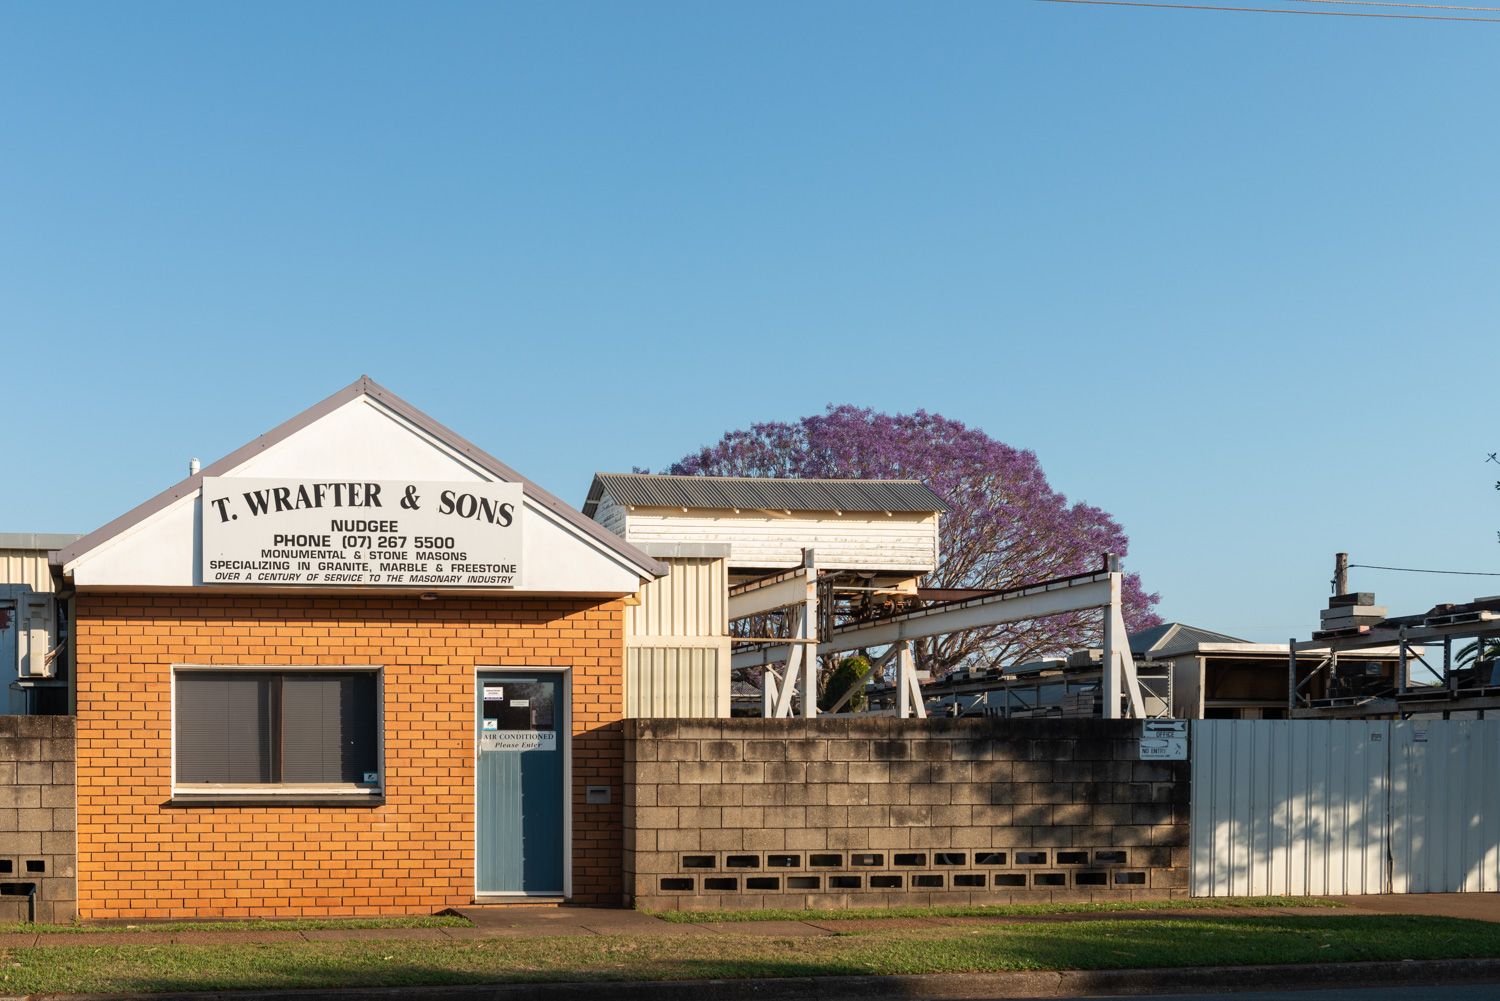 T. Wrafter & Sons Brisbane stonemasons factory at Nudgee.